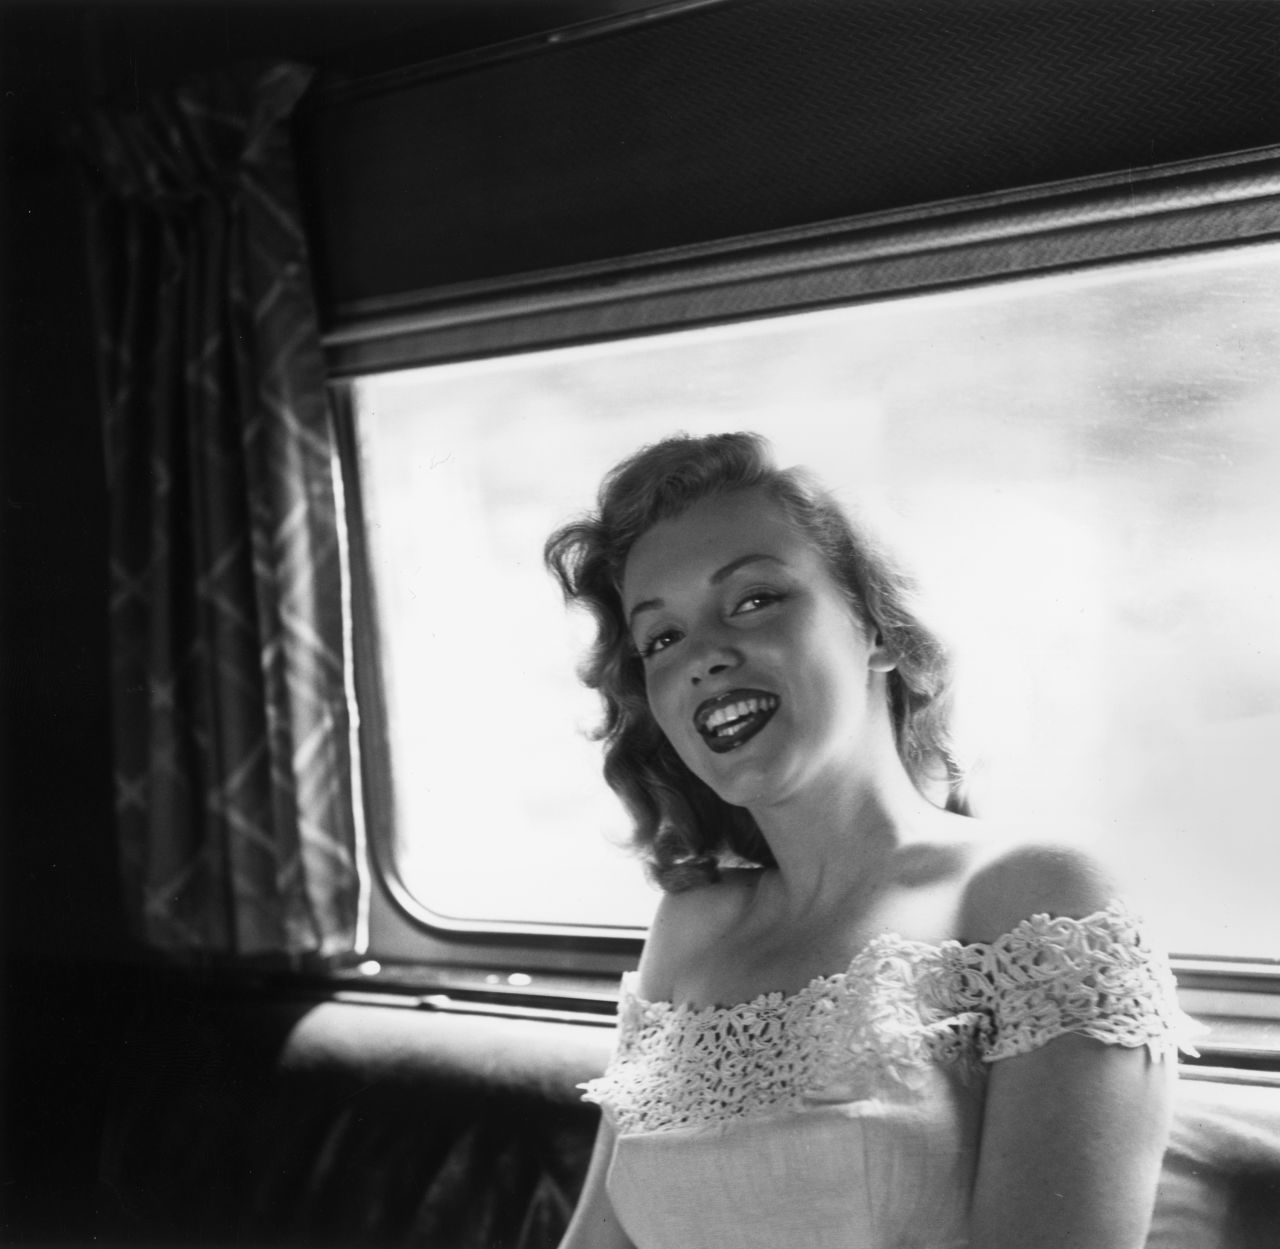 Monroe is seen sitting on a train to Warrenburg, New York, to present the keys to a new house to a winner of a Photoplay Magazine contest in 1949. Photoplay Magazine was an American film fan magazine. Monroe was on the cover in 1953.